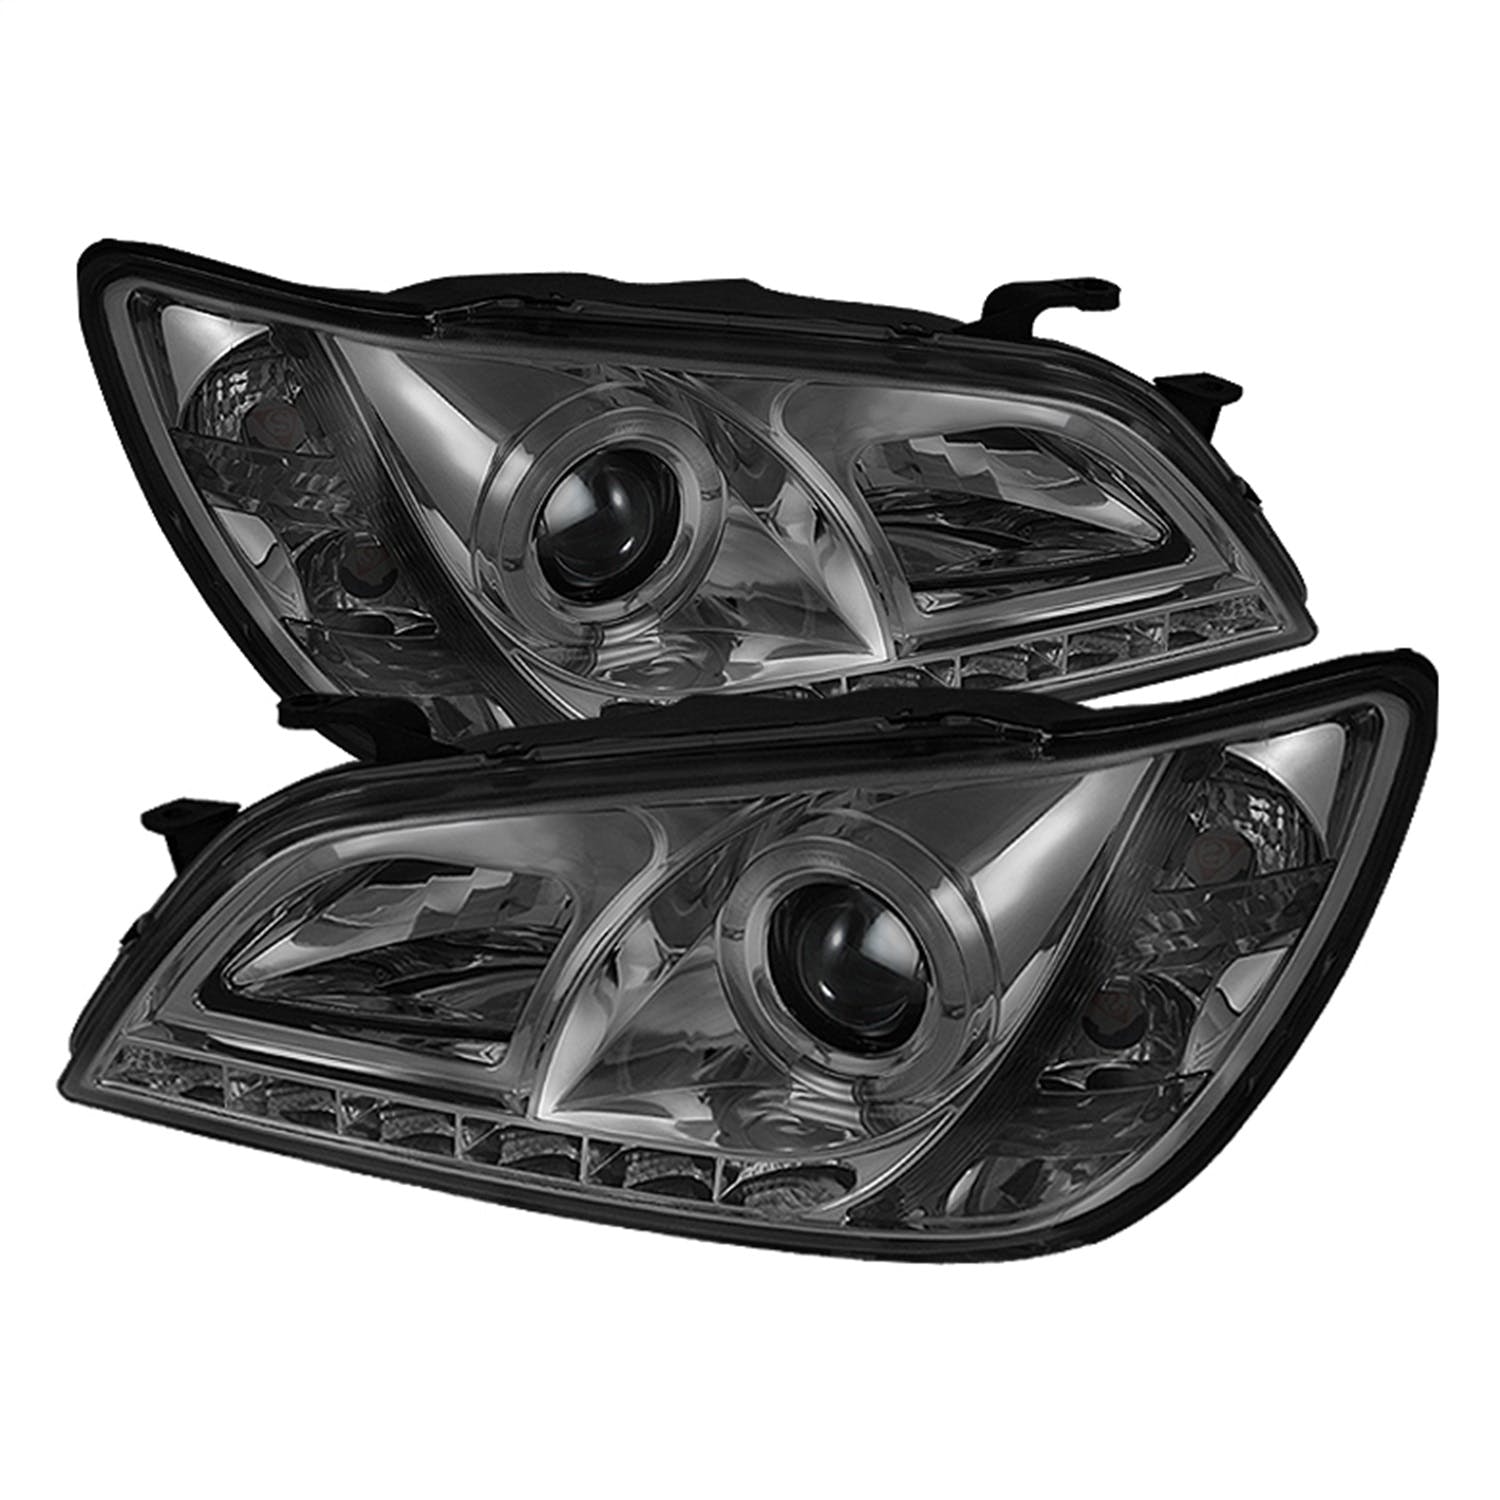 Spyder Auto 5029911 (Spyder) Lexus IS300 01-05 Projector Headlights-Xenon/HID Model Only ( Not Compa